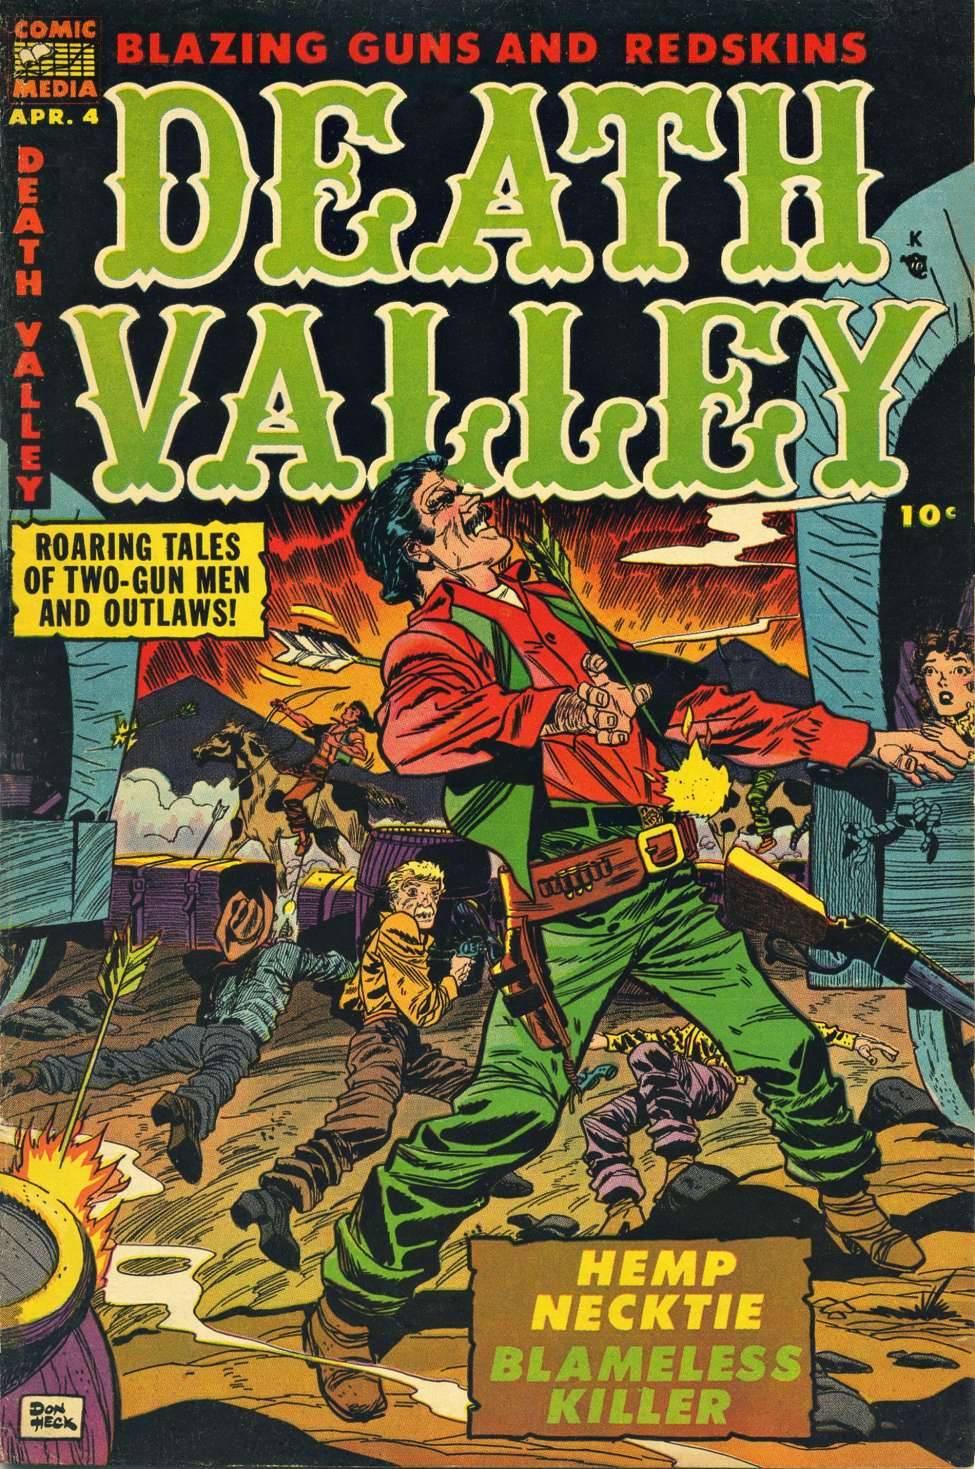 Comic Book Cover For Death Valley 4